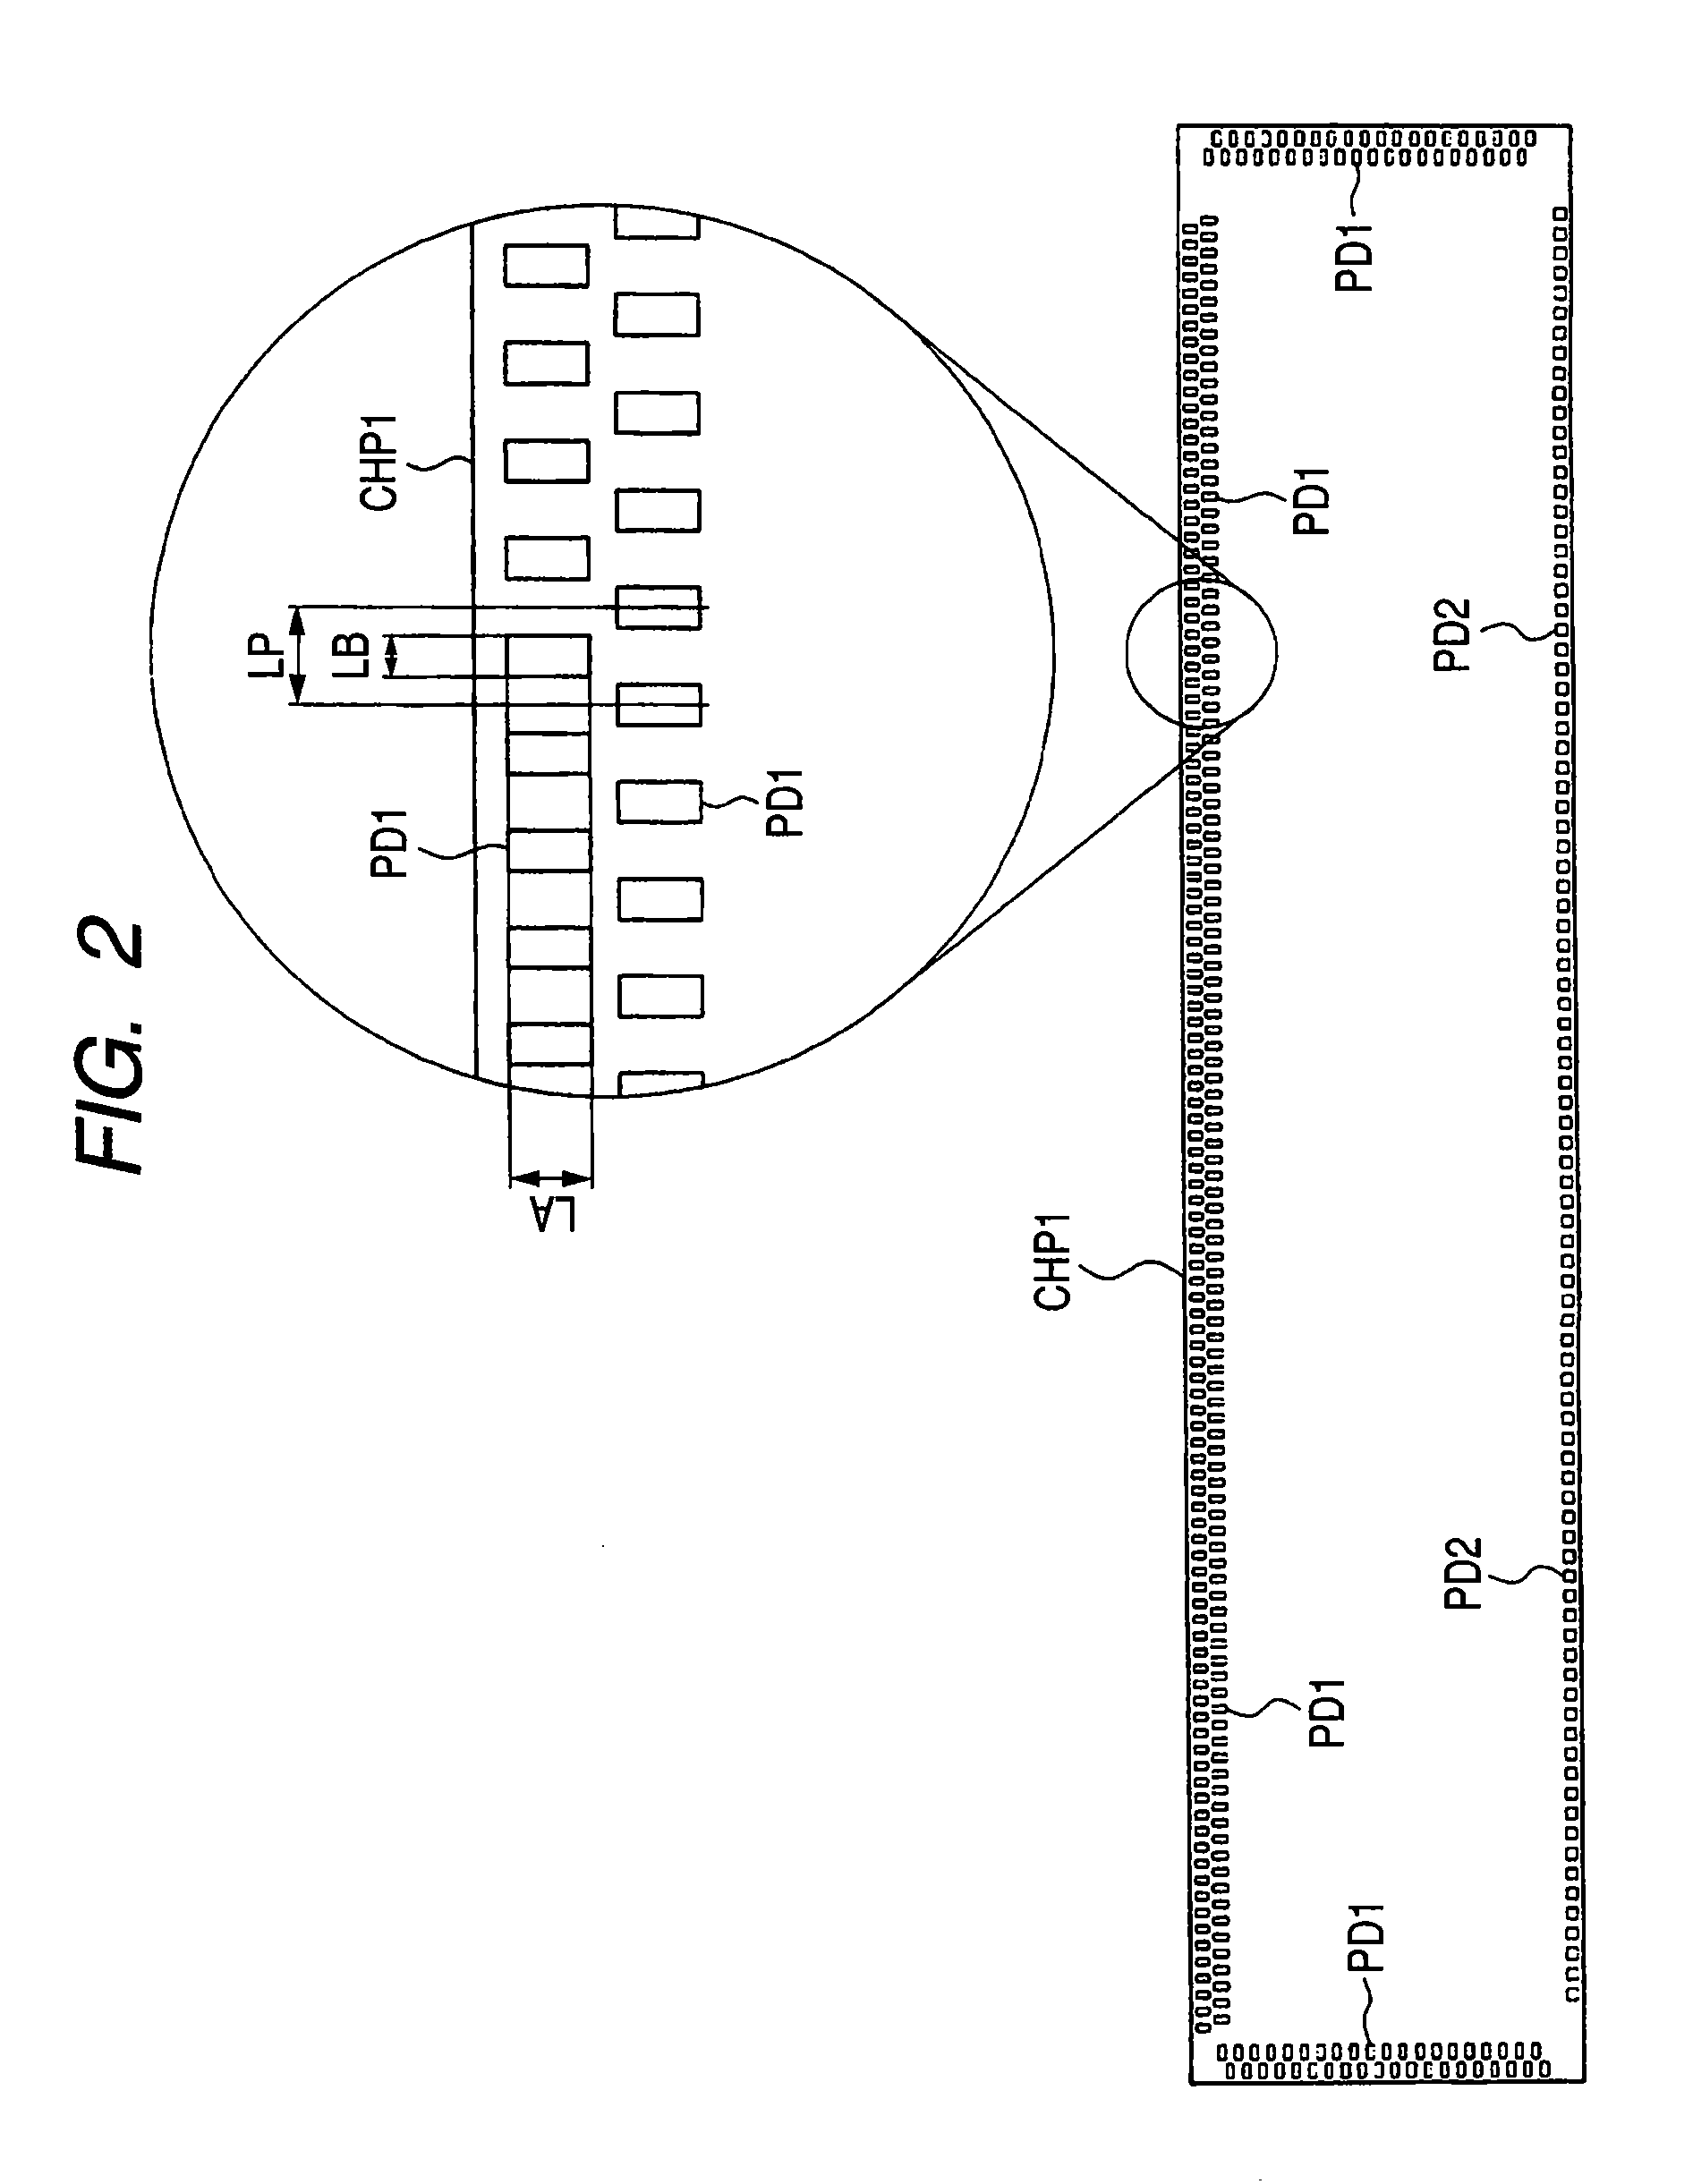 Method of manufacturing a semiconductor integrated circuit device